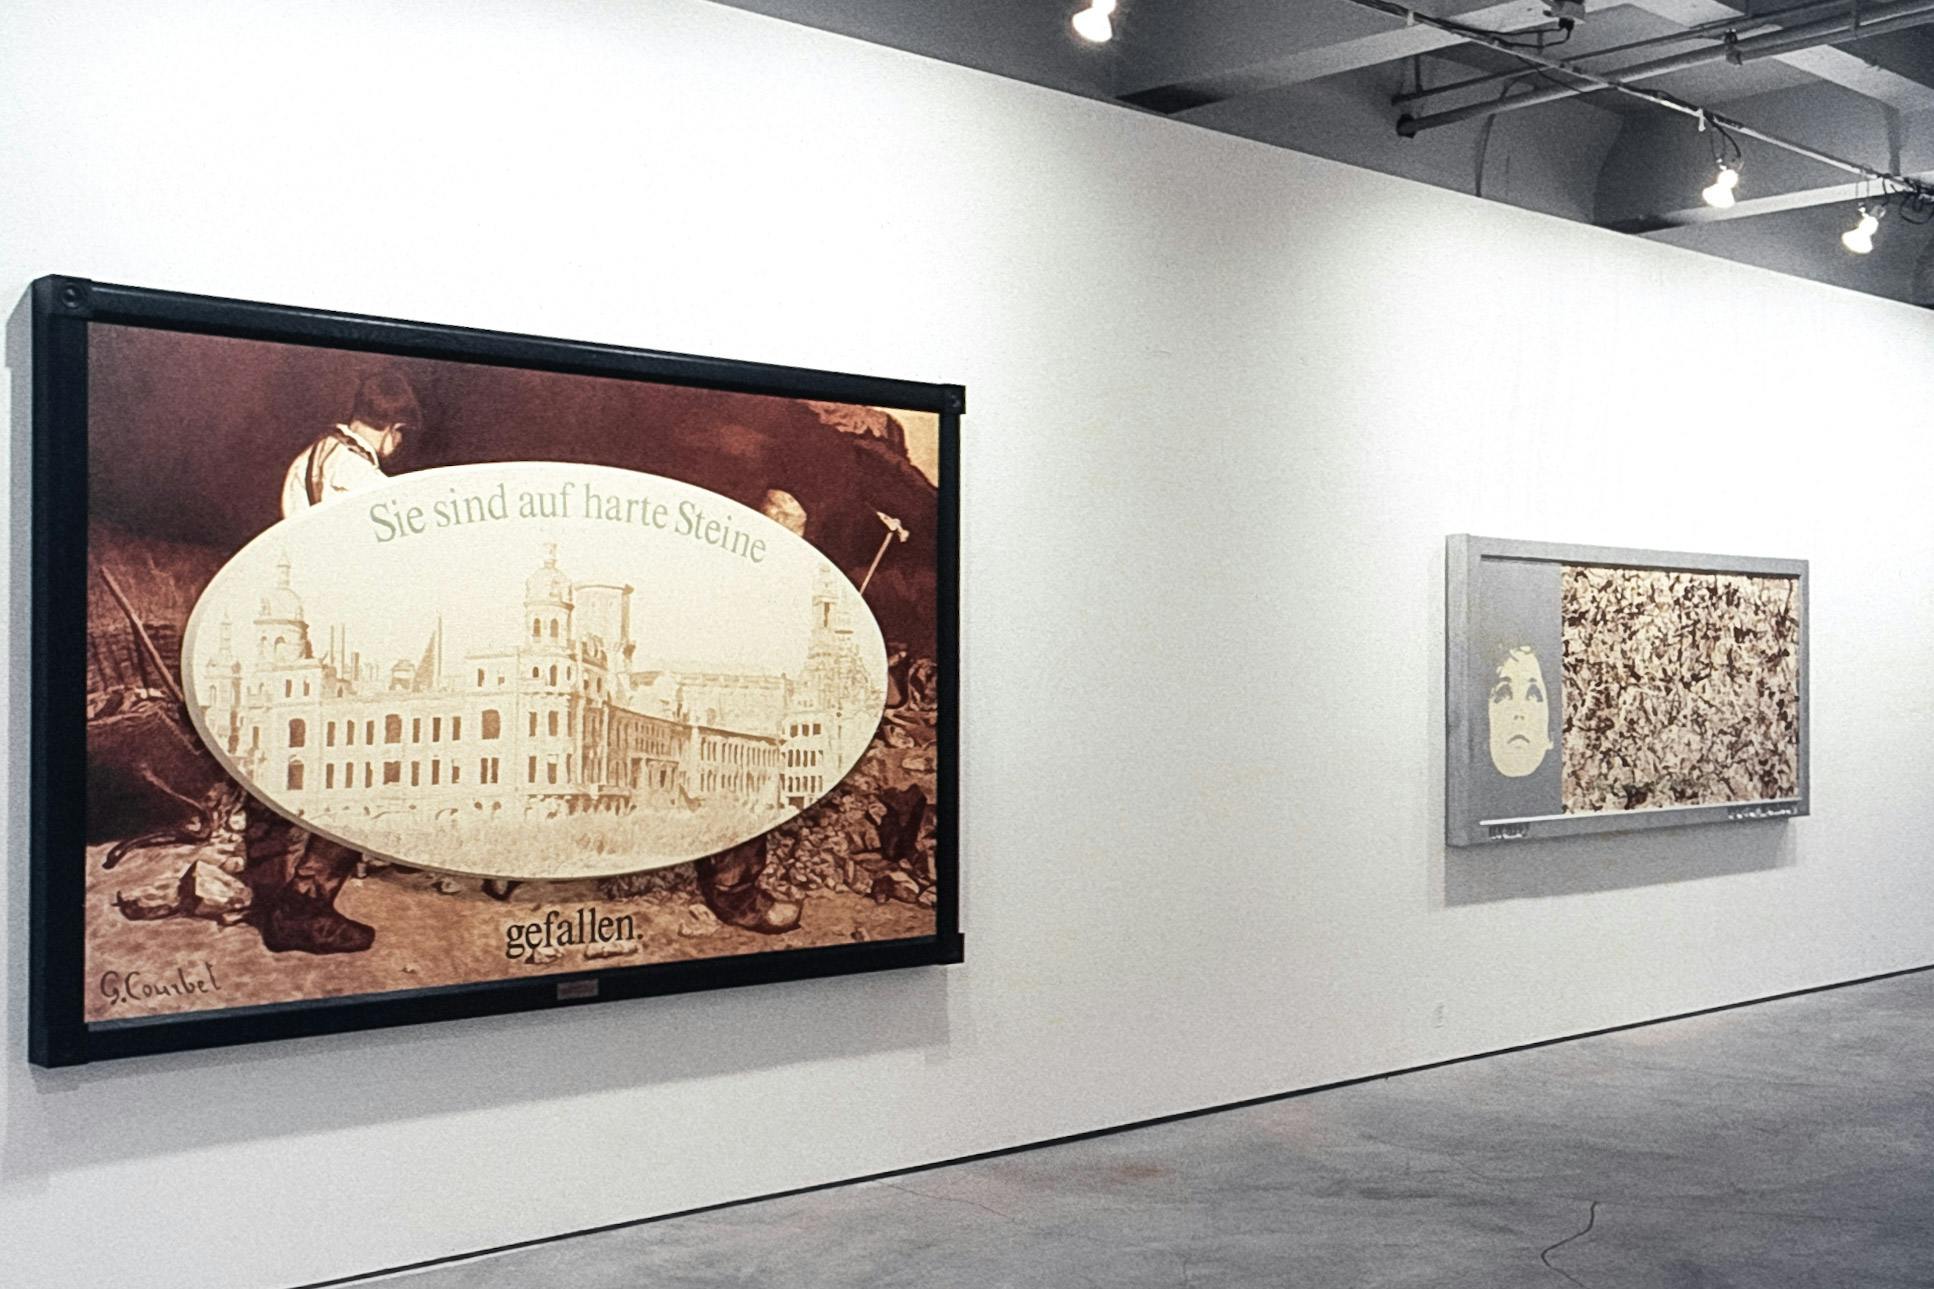 2 large framed paintings in a gallery. One is a sepia-toned painting showing two young people splitting rocks with pickaxes. In the foreground there is German text and a long building in a white oval.